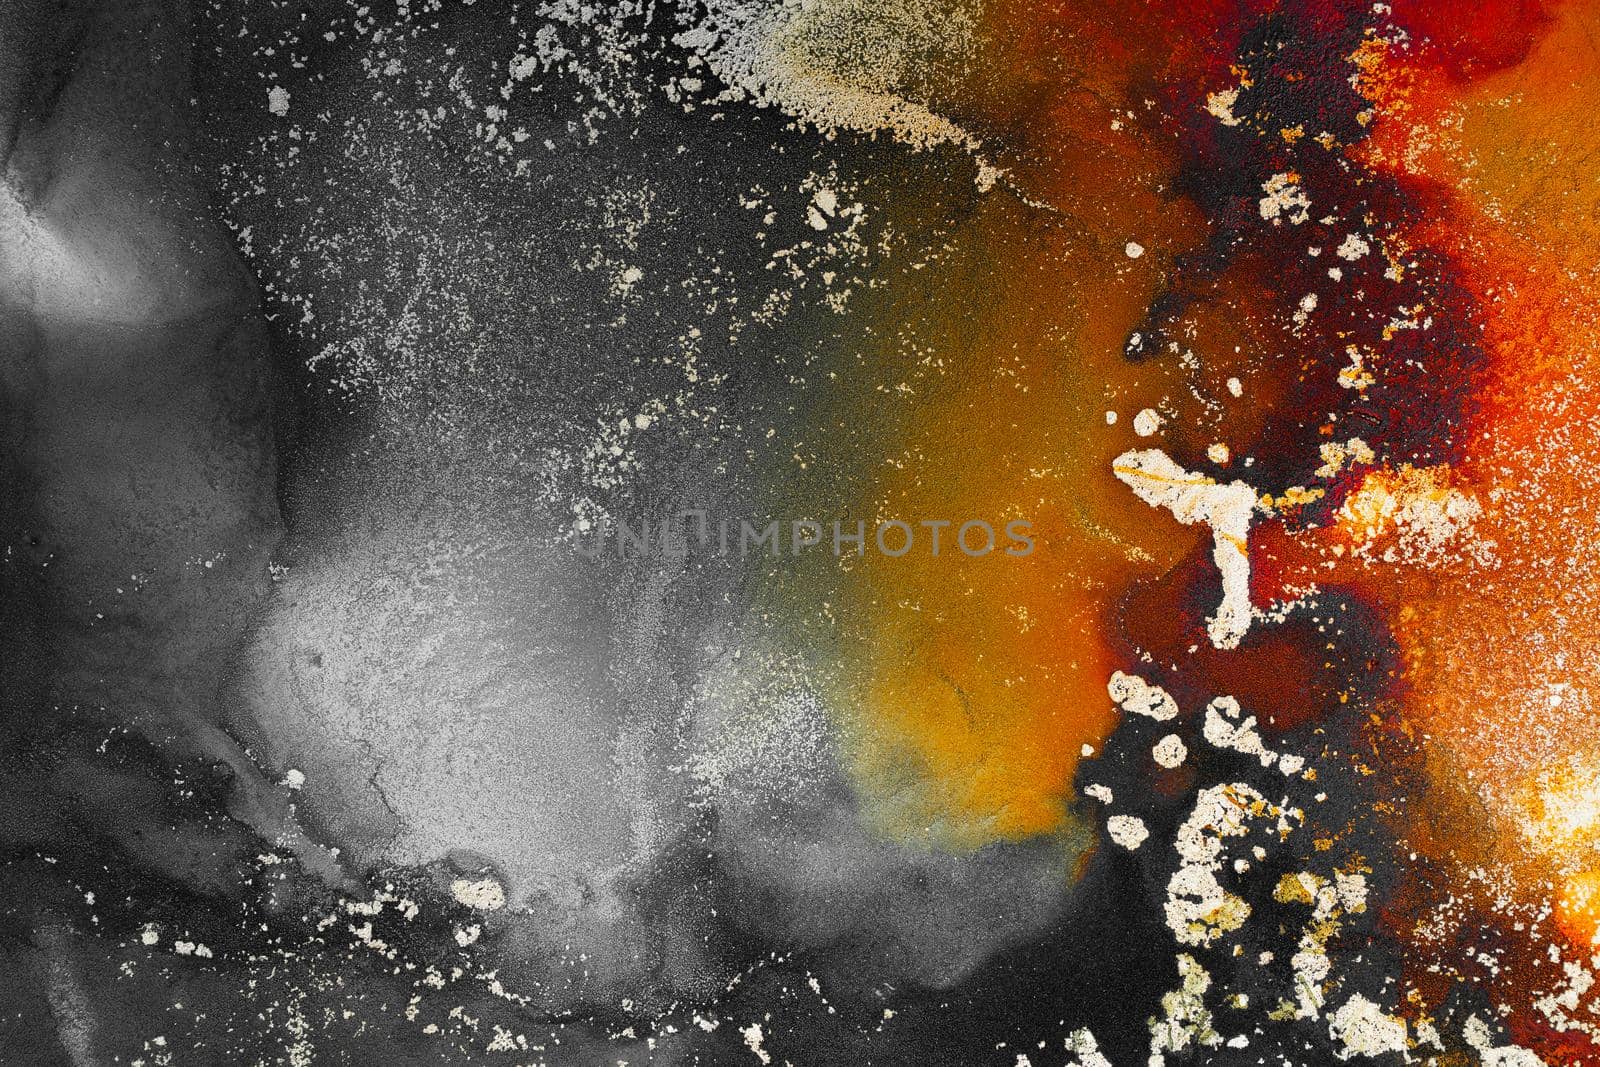 Burning abstract background from marble ink art of exquisite original painting . Painting was painted on high quality paper texture to create smooth marble background pattern of ombre alcohol ink .